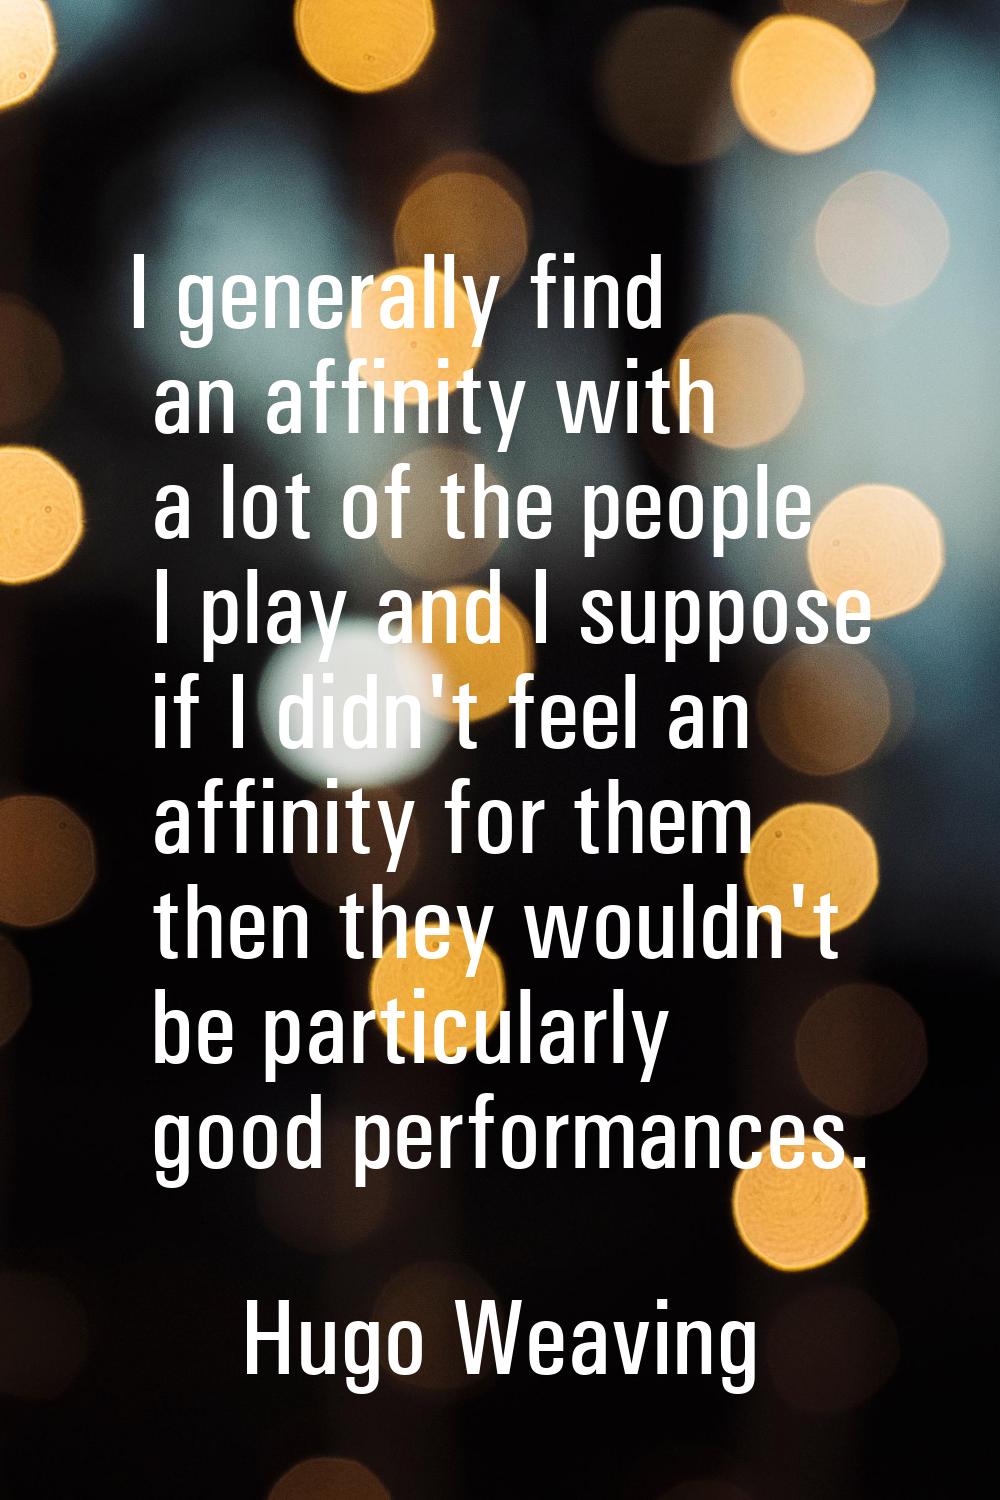 I generally find an affinity with a lot of the people I play and I suppose if I didn't feel an affi